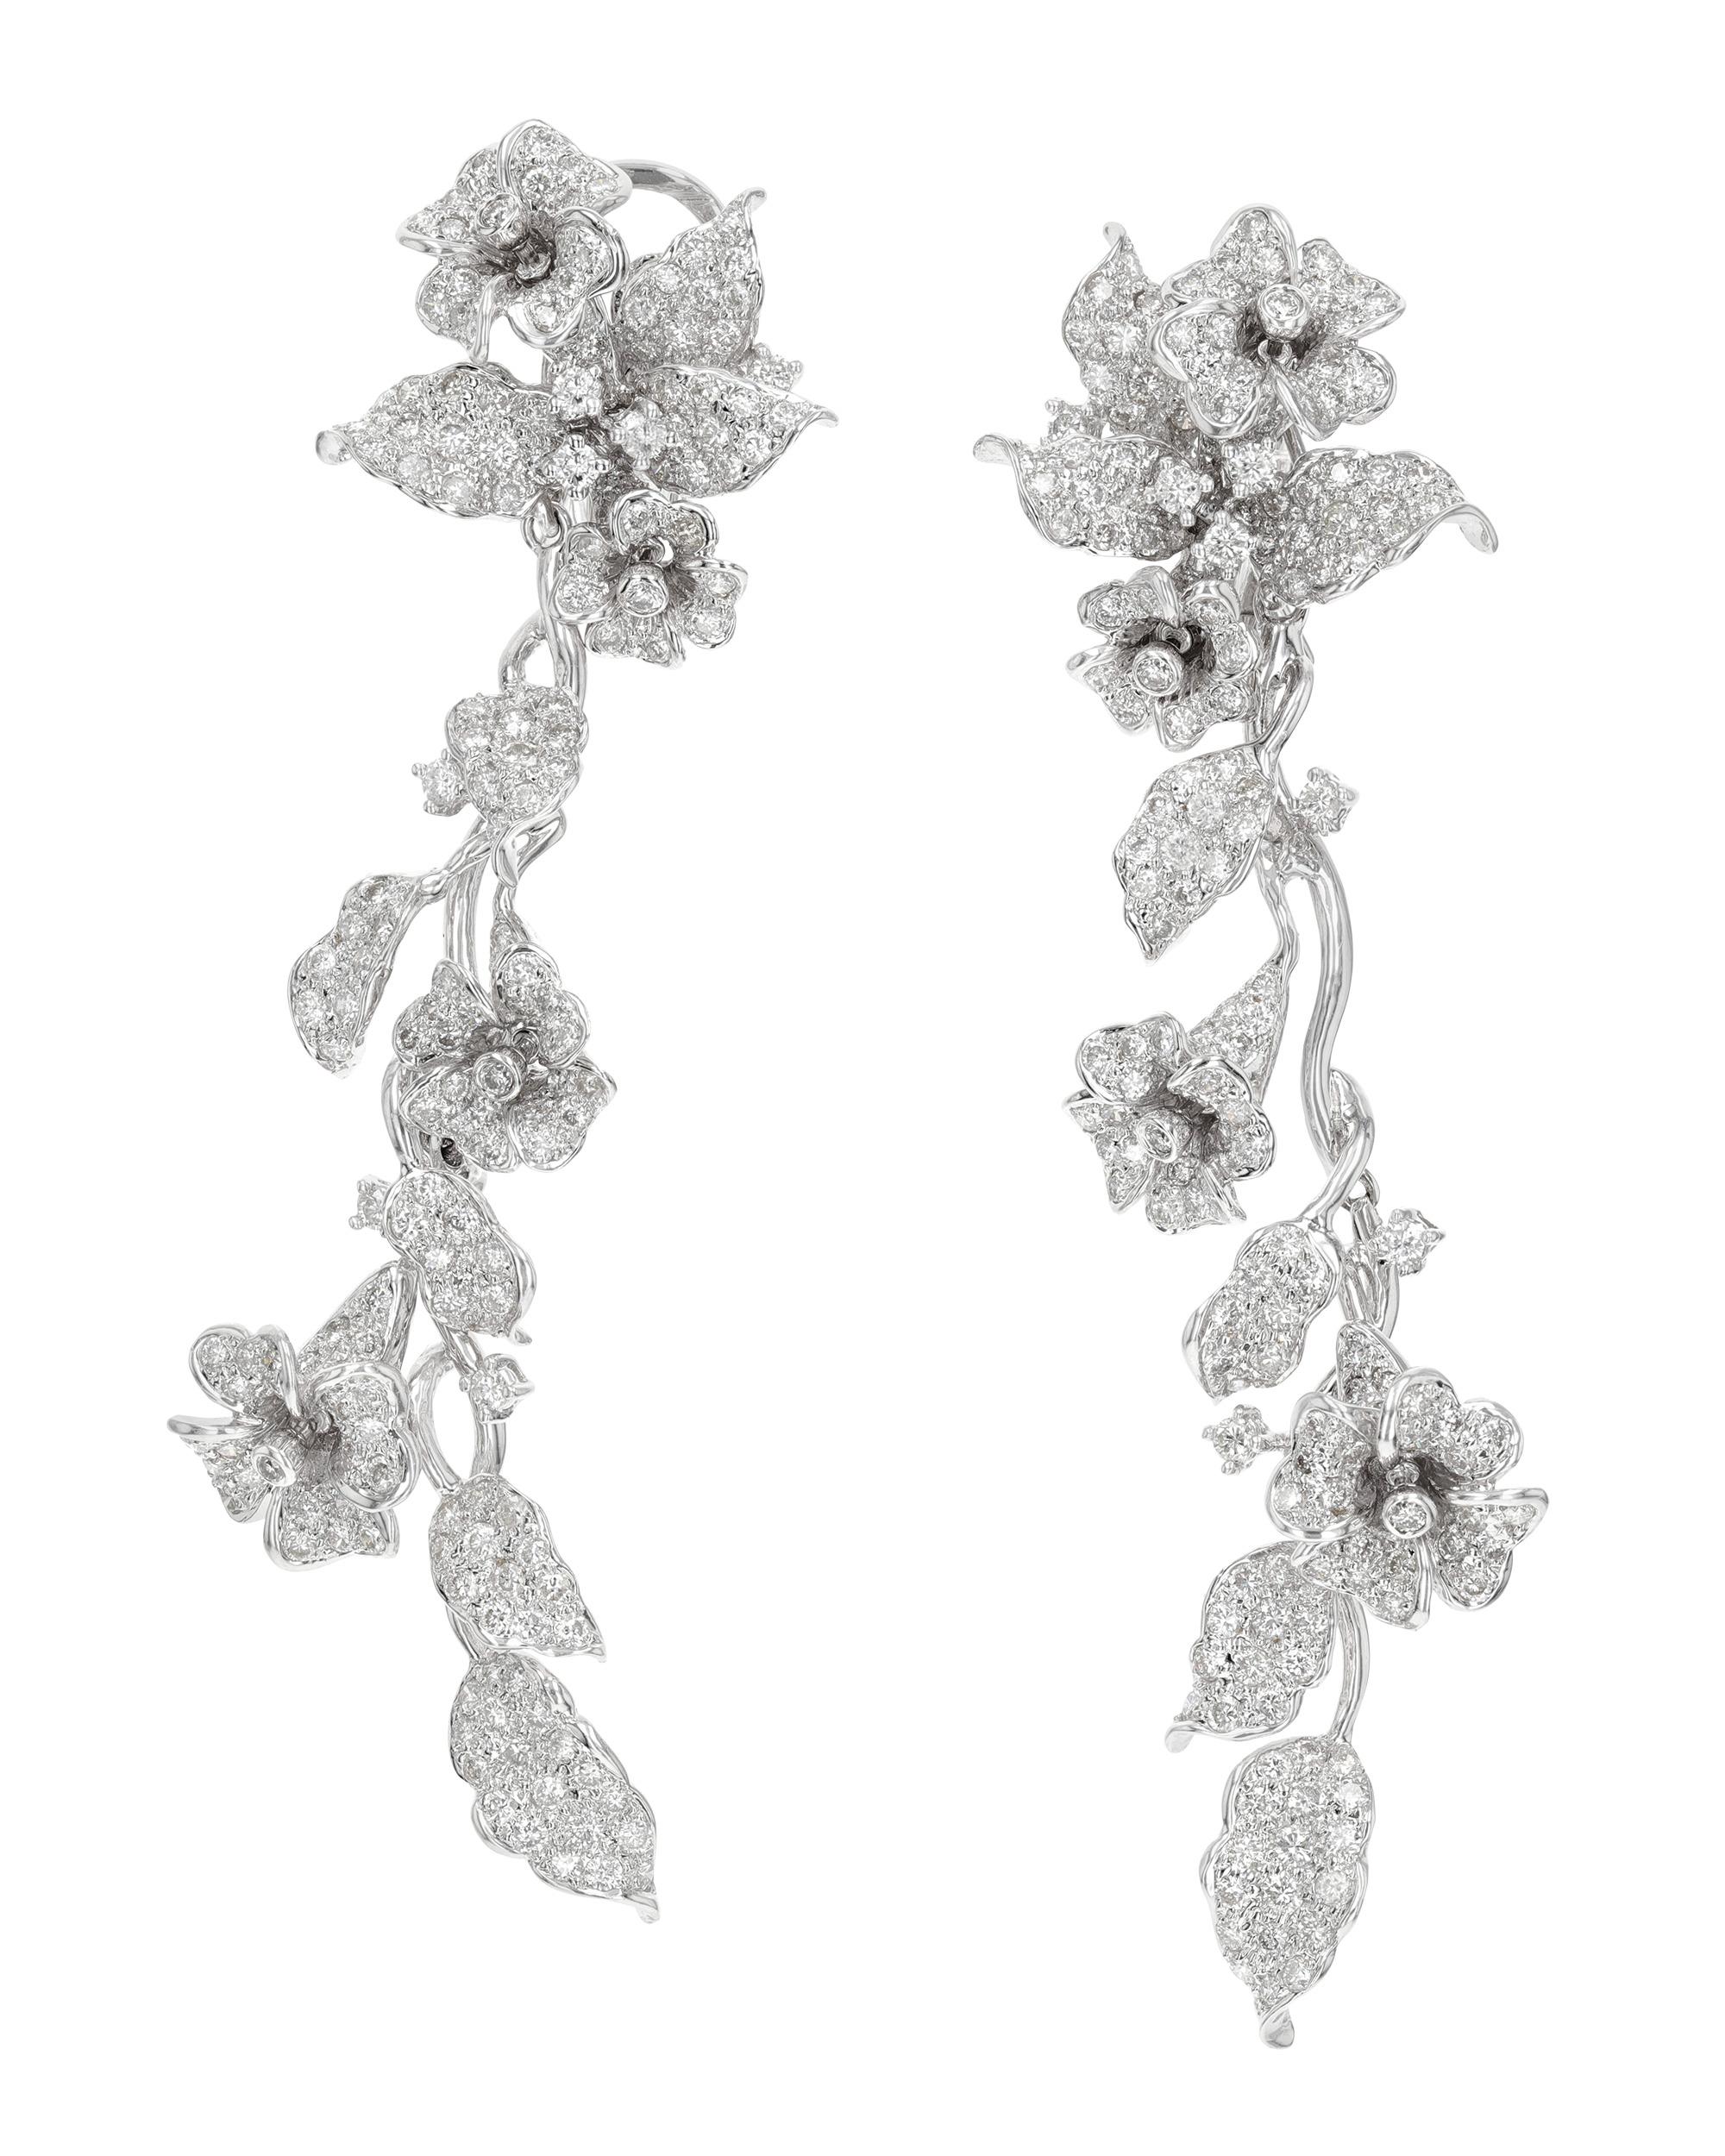 These romantic and elegant floral earrings evoke the beauty of springtime year-round. Diamonds totaling approximately 7.35 carats form the flowers and foliage, lending ample sparkle to the organic design. The dangling vines are detachable, providing